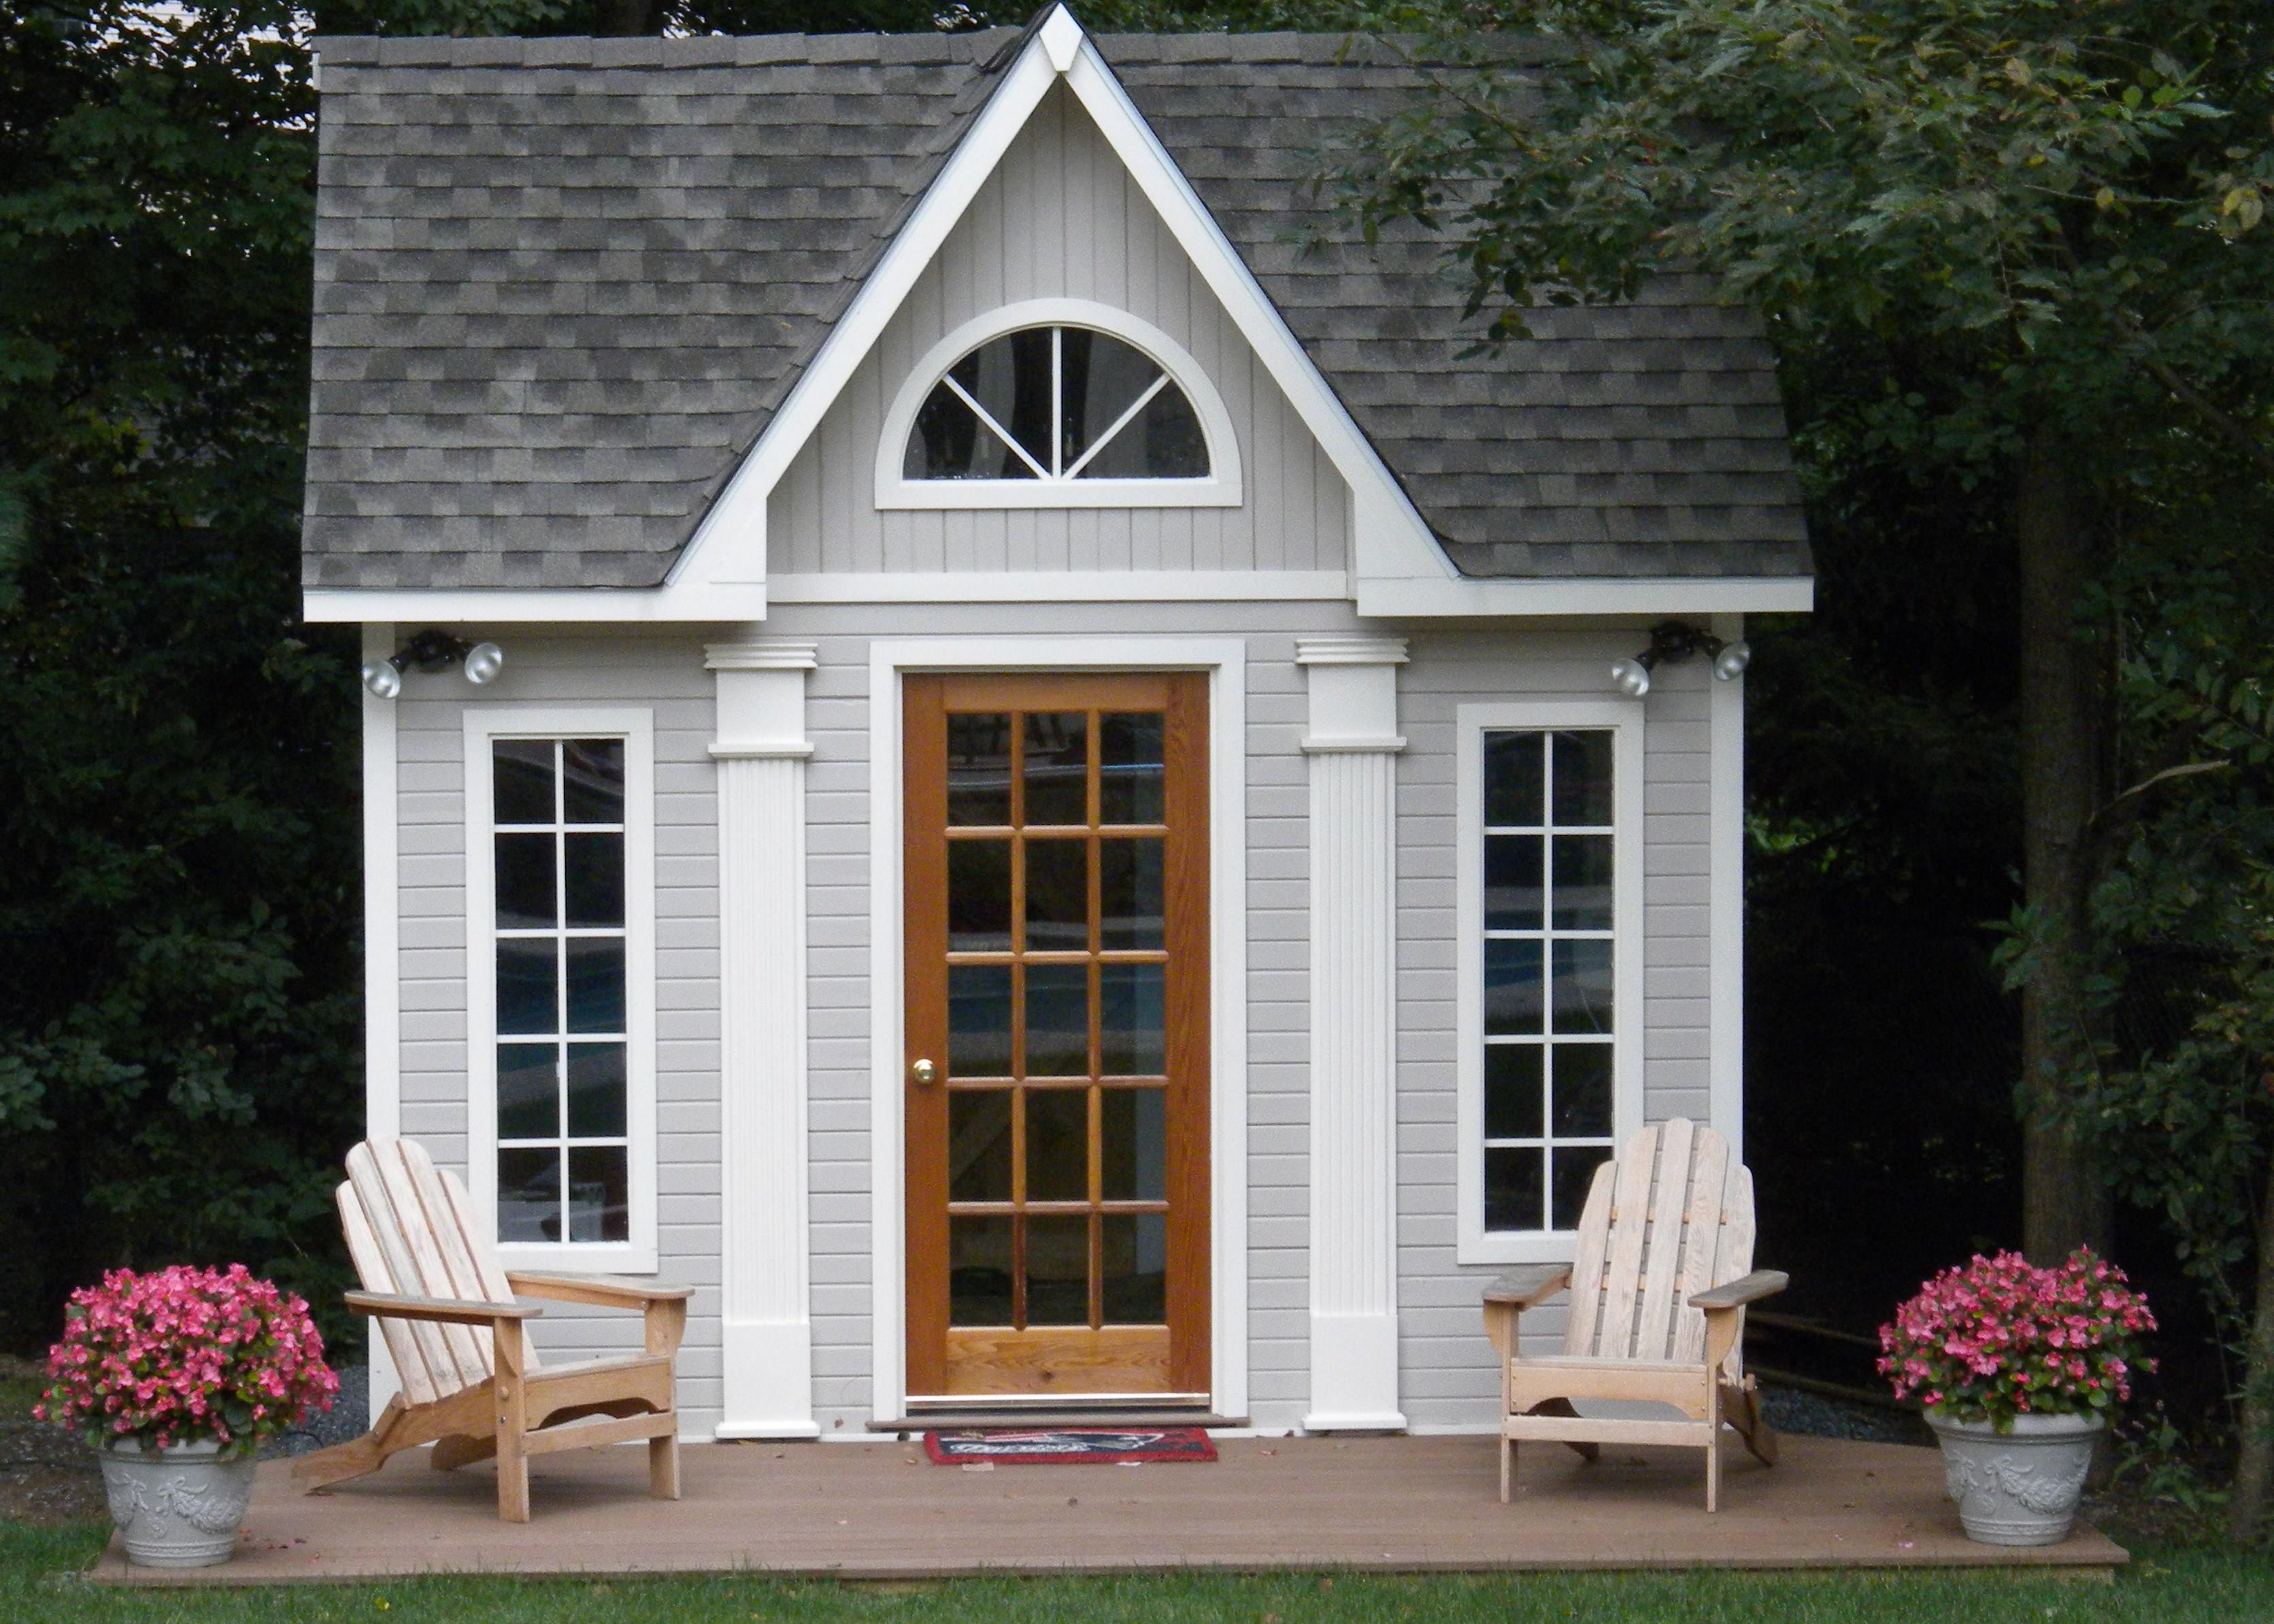 Copper Creek 10x12 workshop with arch window in Andover Massachusetts. ID number 206030-2